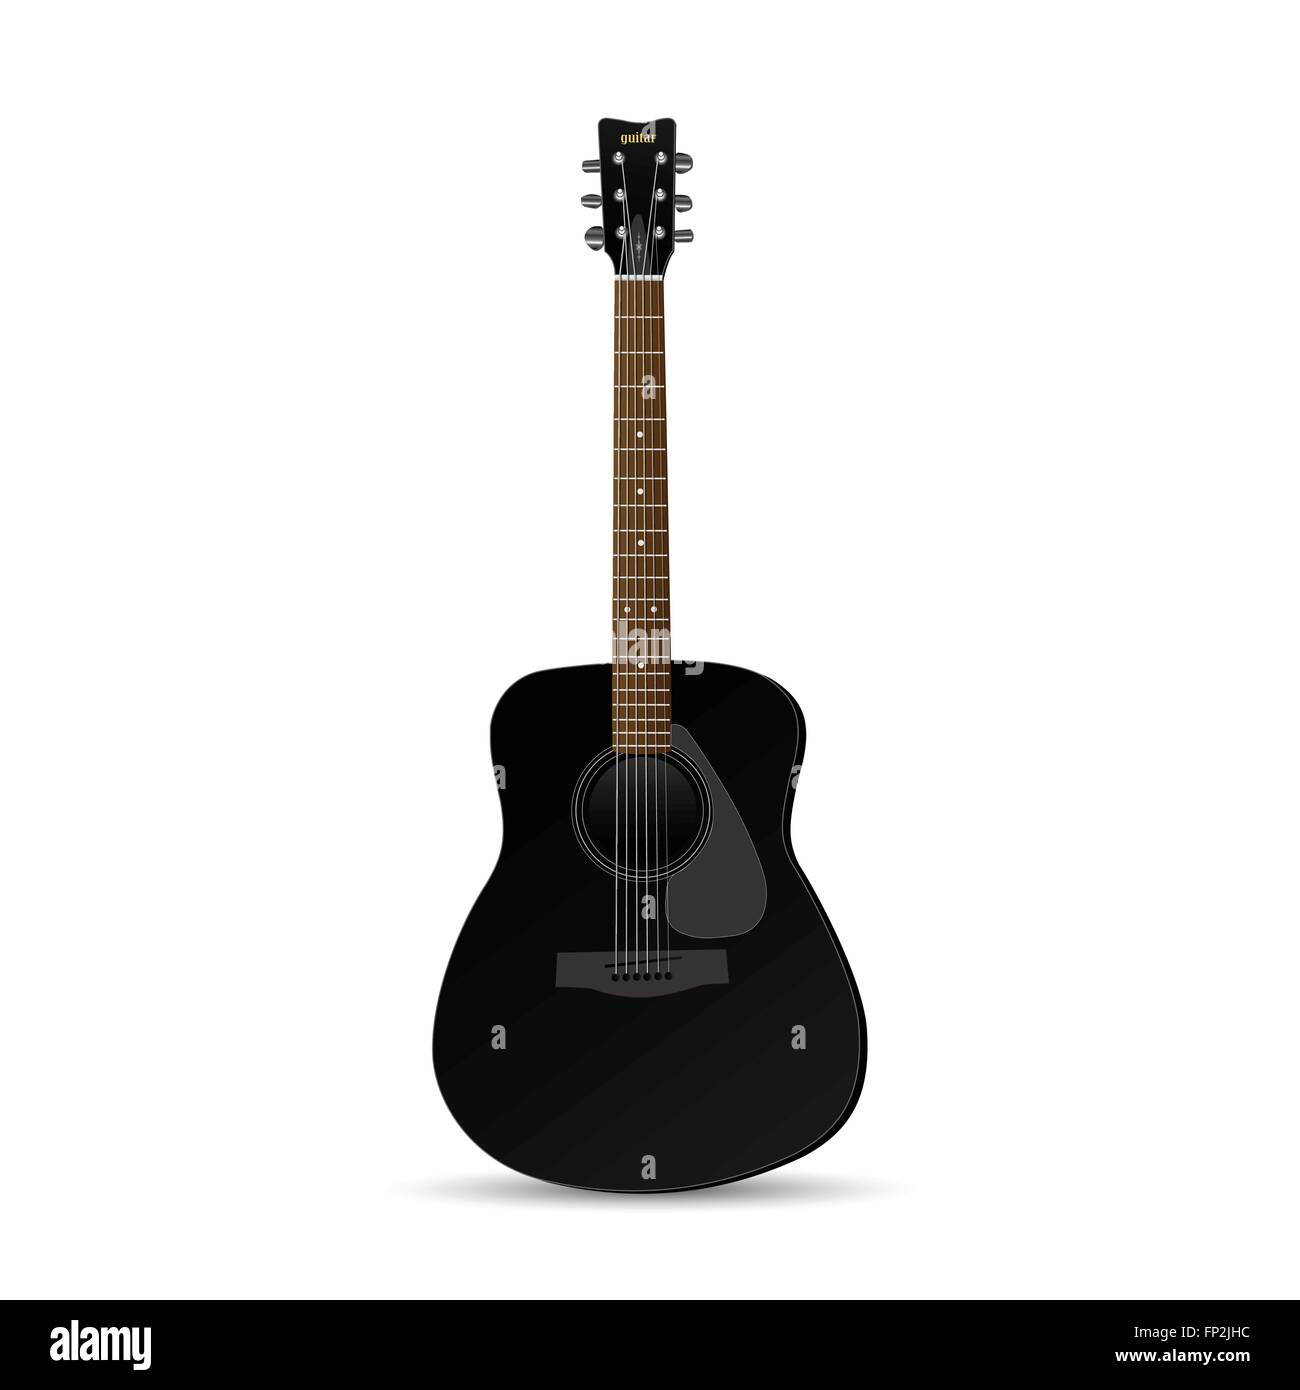 Illustration of a black guitar isolated on a white background. Stock Vector